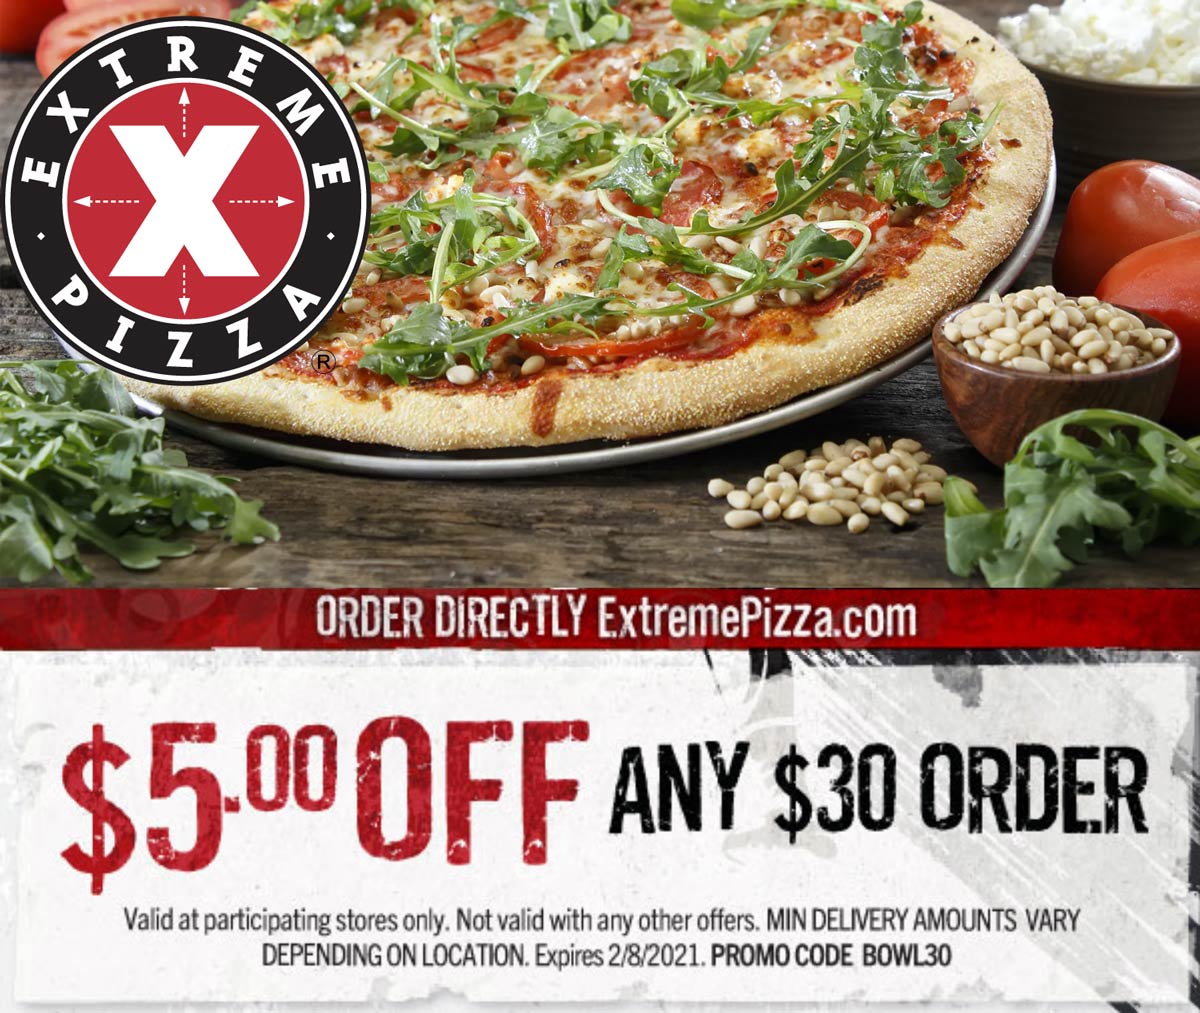 Extreme Pizza restaurants Coupon  $5 off $30 at Extreme Pizza via promo code BOWL30 #extremepizza 